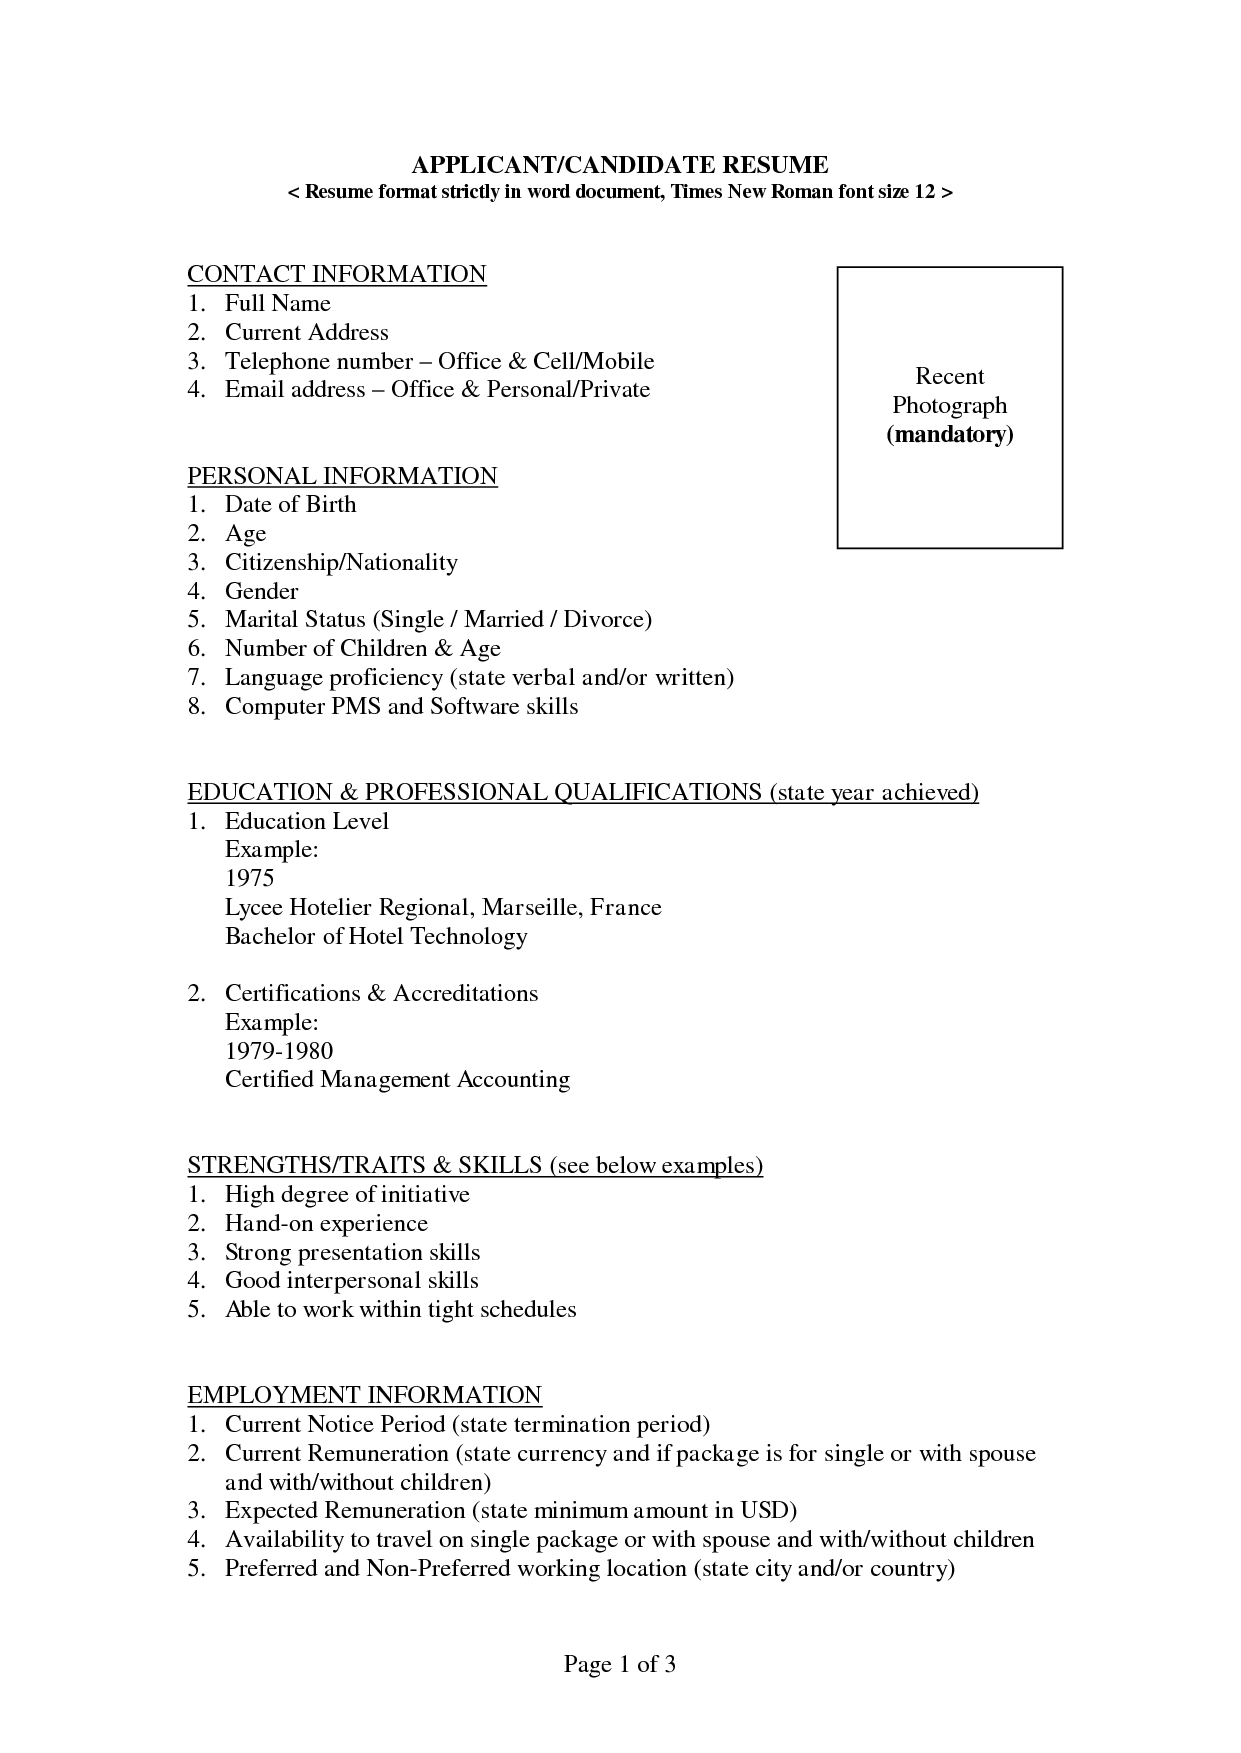 Resume Format Download In Ms Word Microsoft Word Resume With Simple Resume Template Microsoft Word